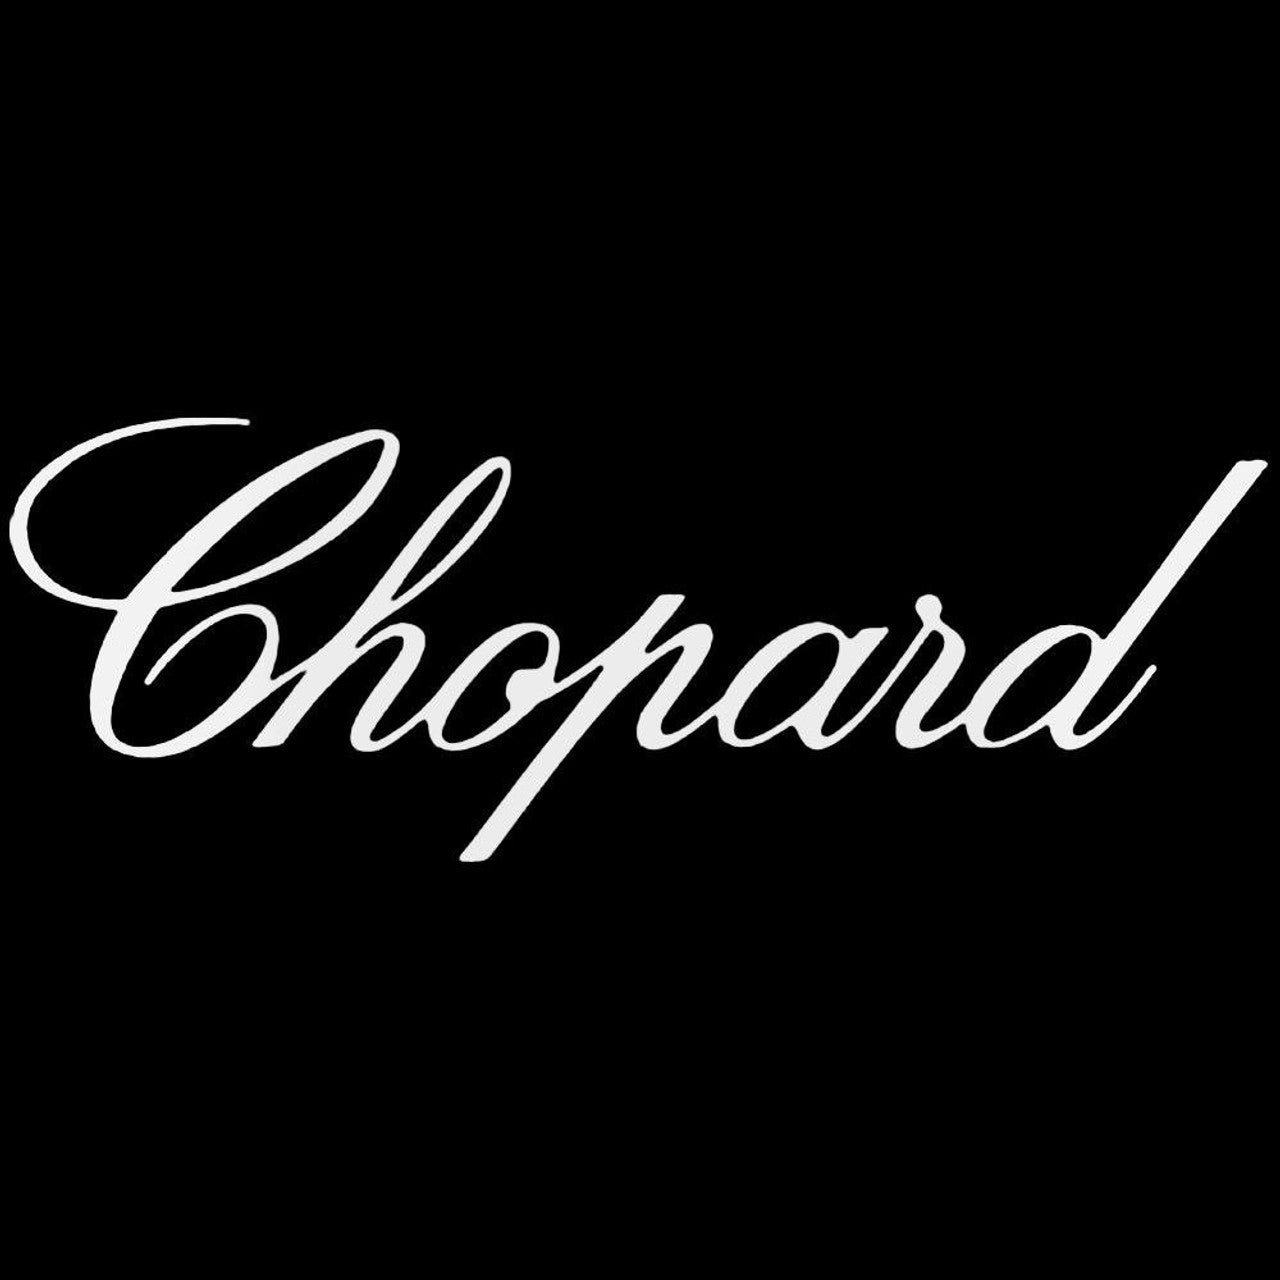 Chopard for her